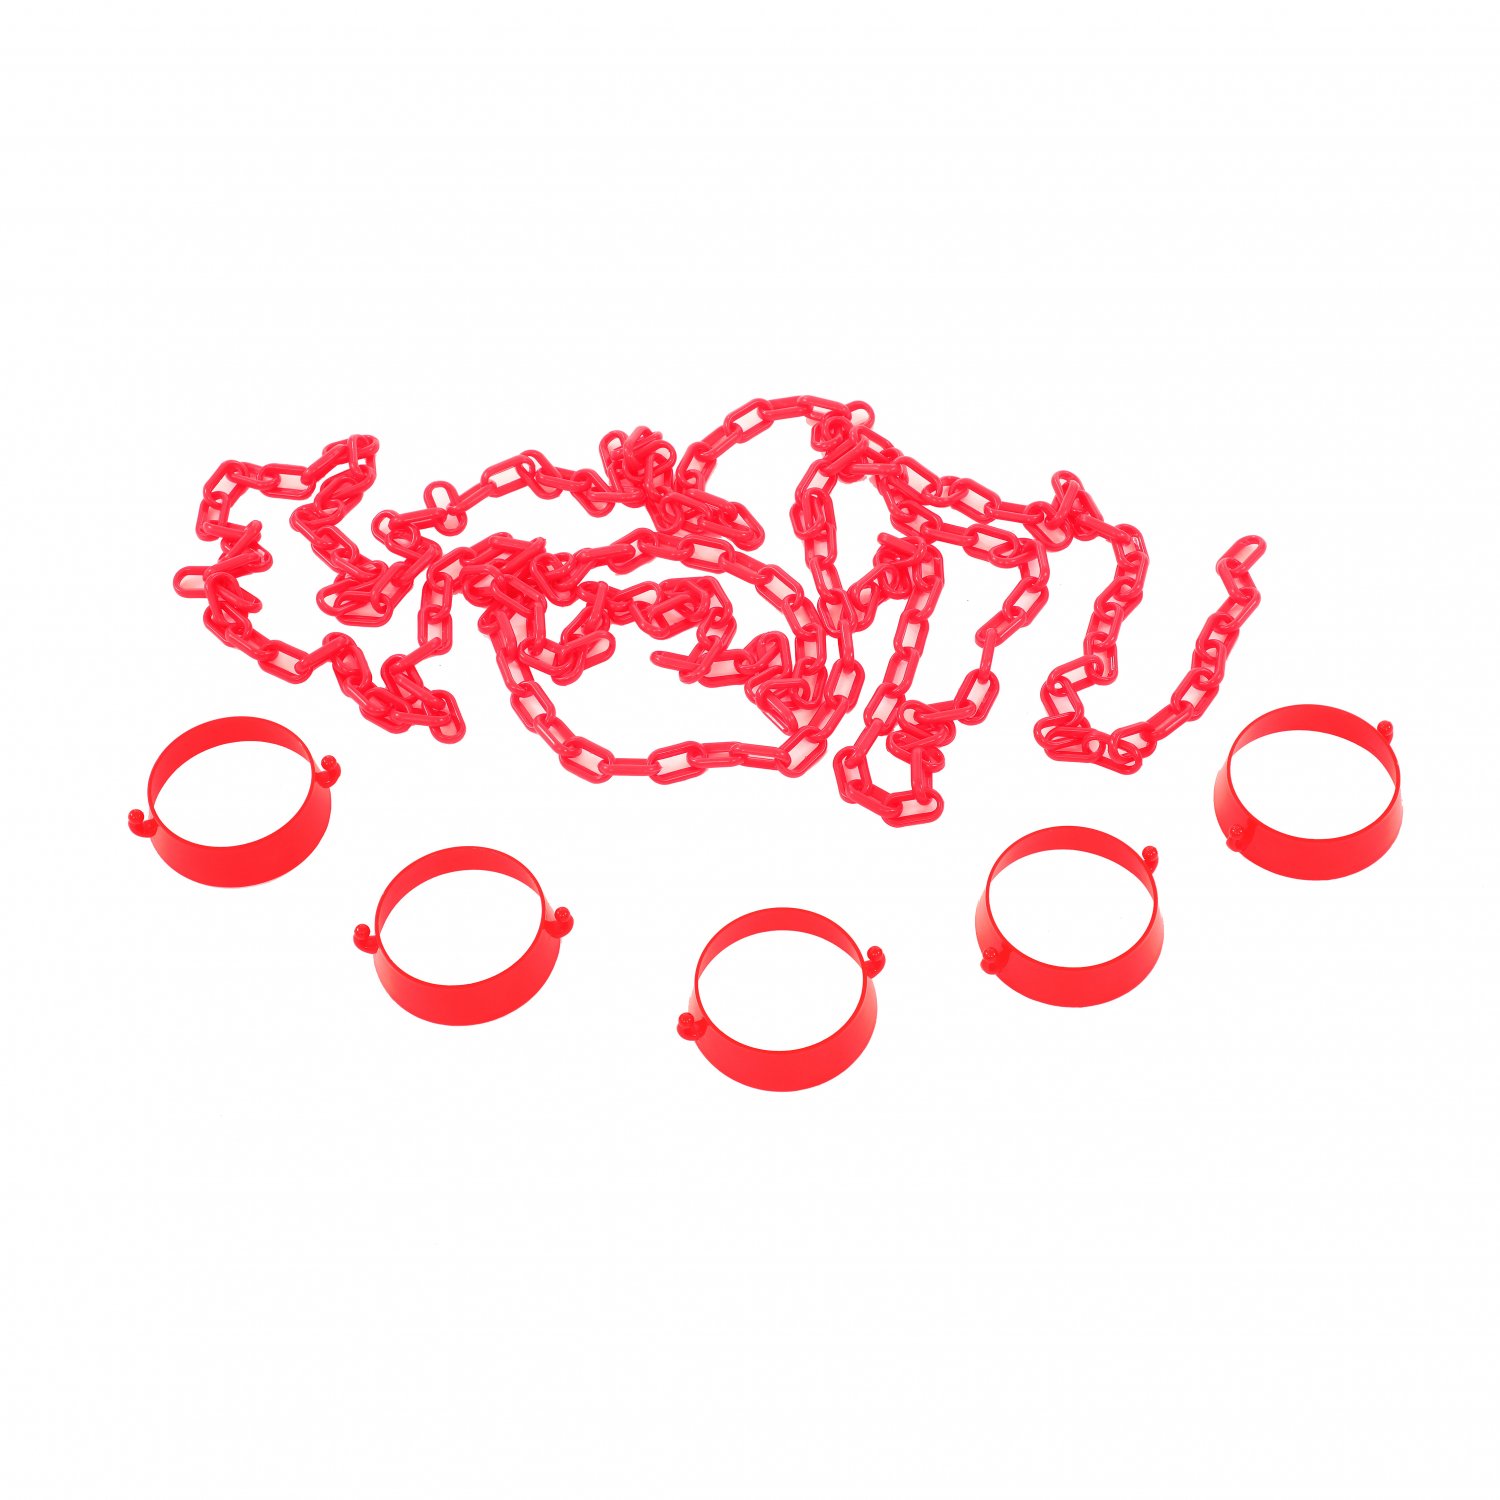 NEW Set of 5 Chain Holders Including 5m Red Plastic Barrier For Road Cones 